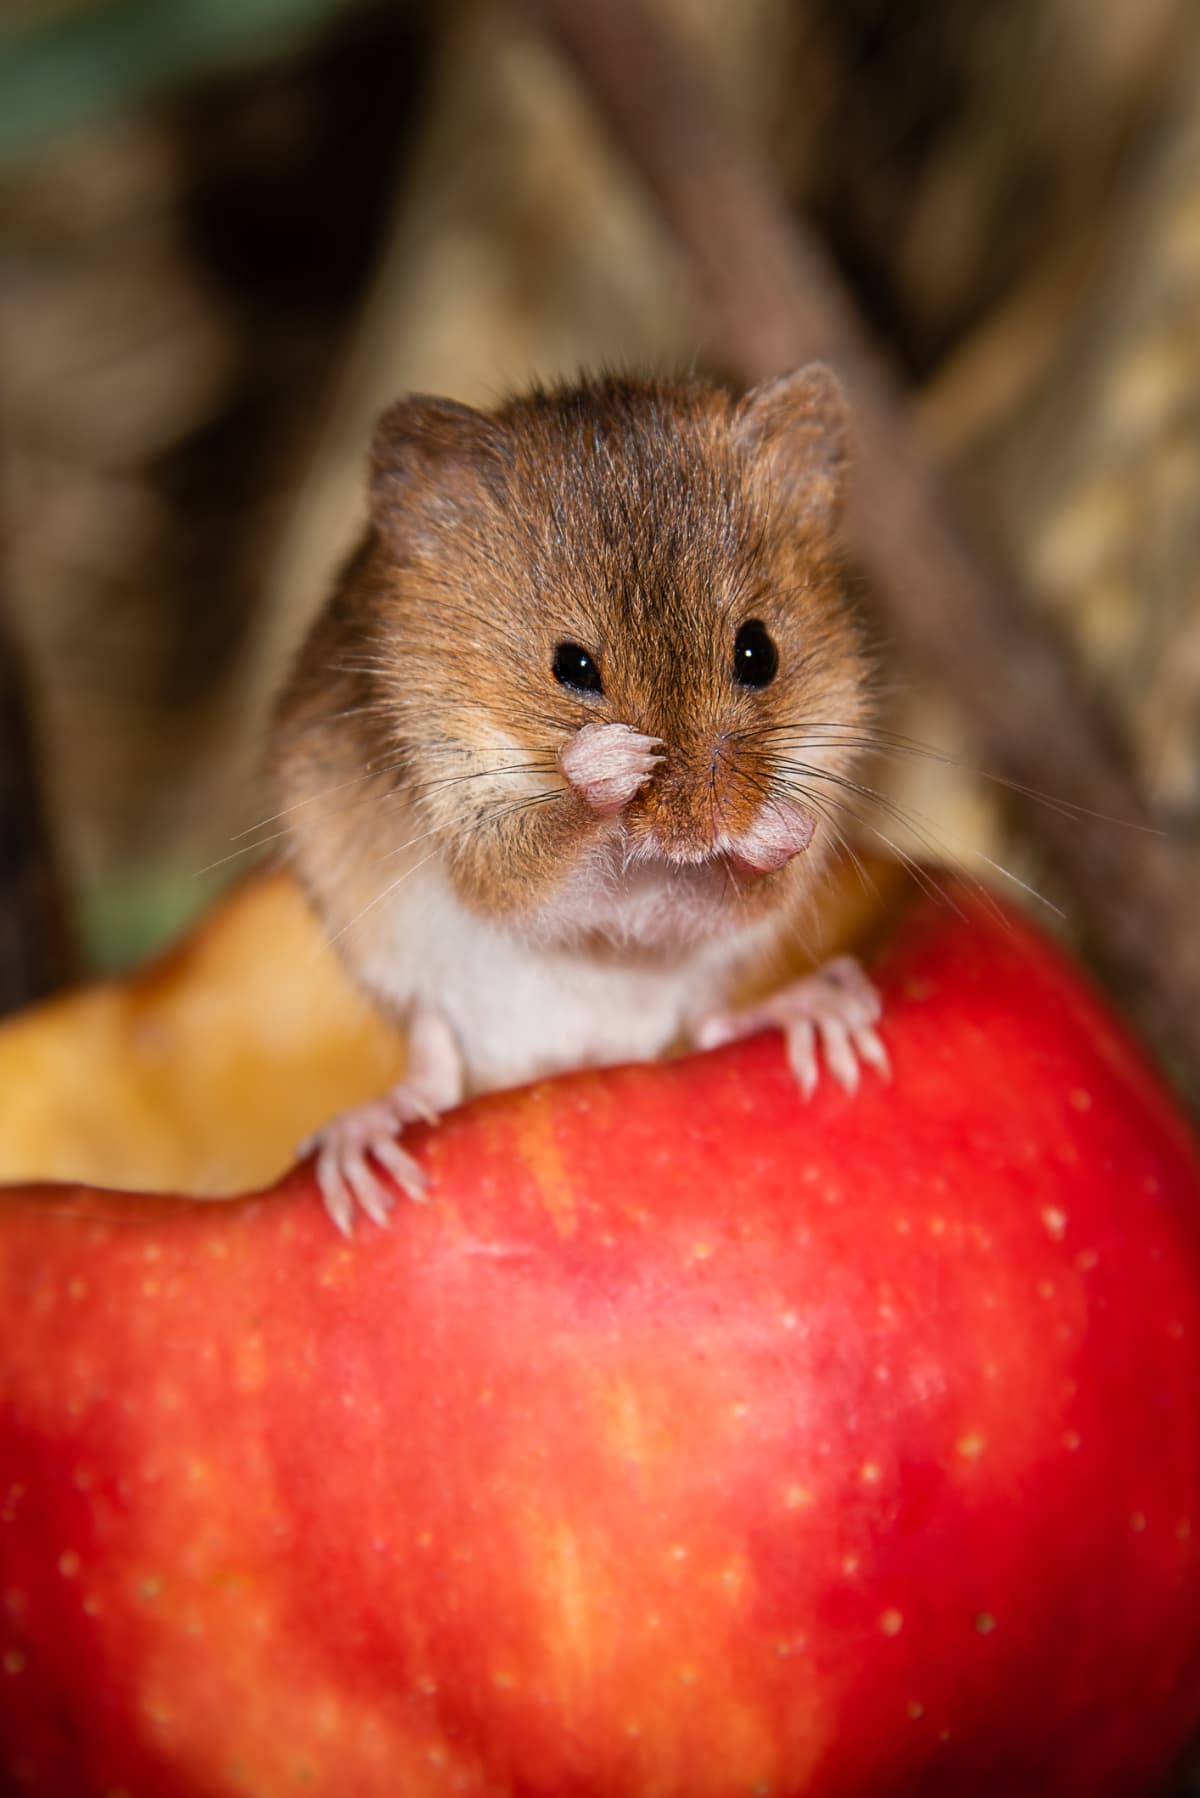 A harvest mouse sits on the edge of a half eaten apple, with one paw on its face.